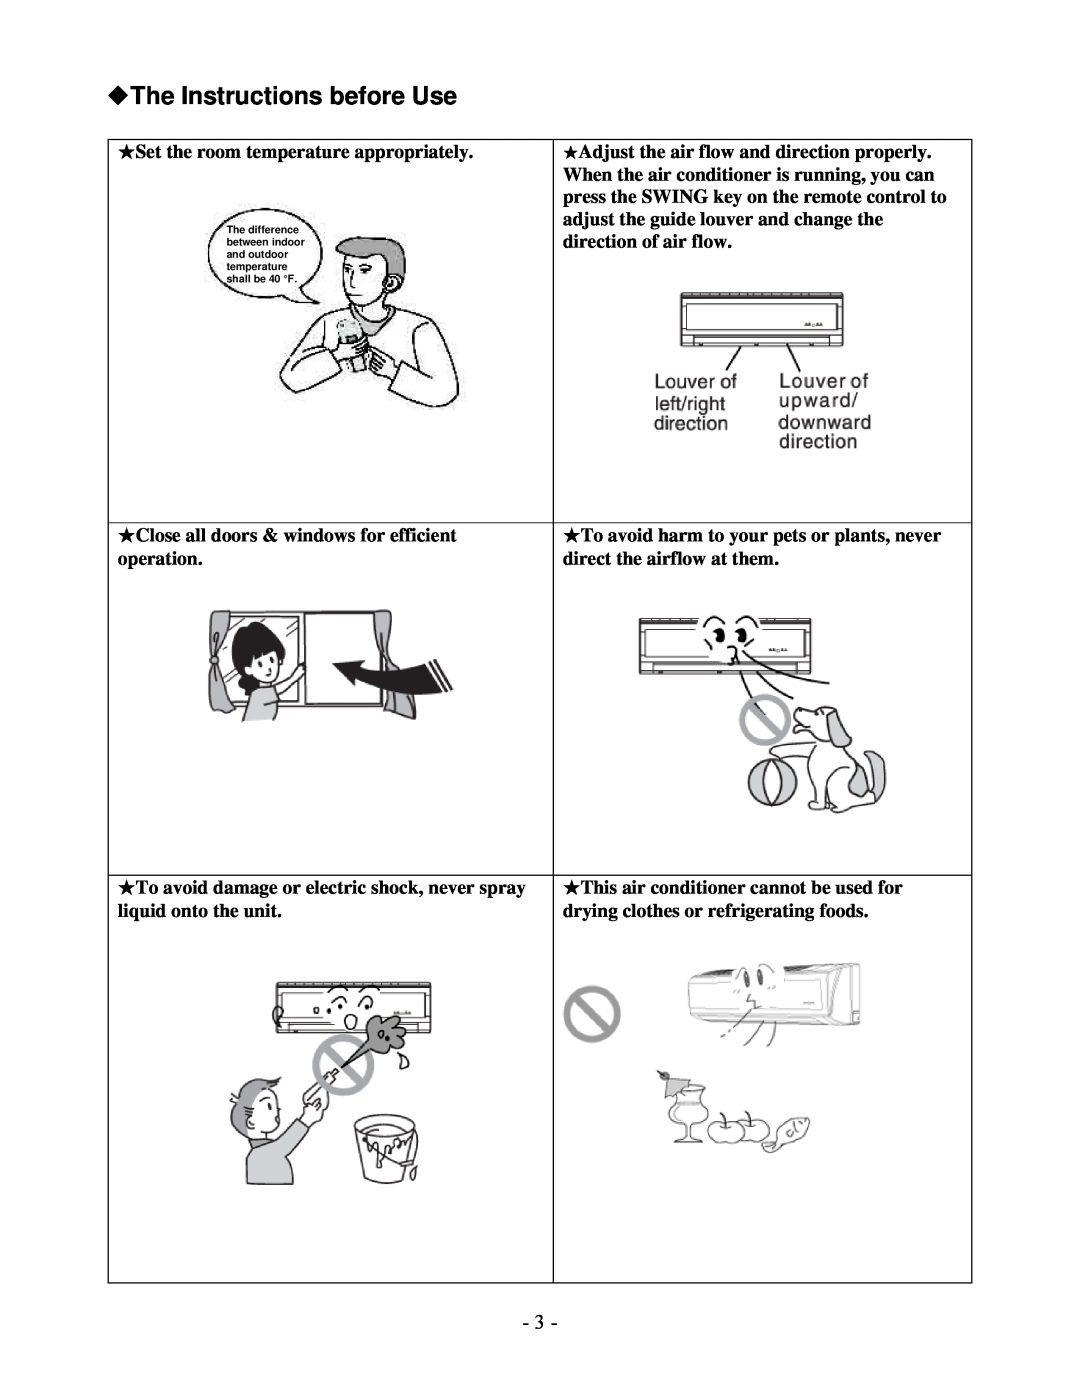 Soleus Air KFHIP-09-OD installation manual The Instructions before Use, Set the room temperature appropriately 